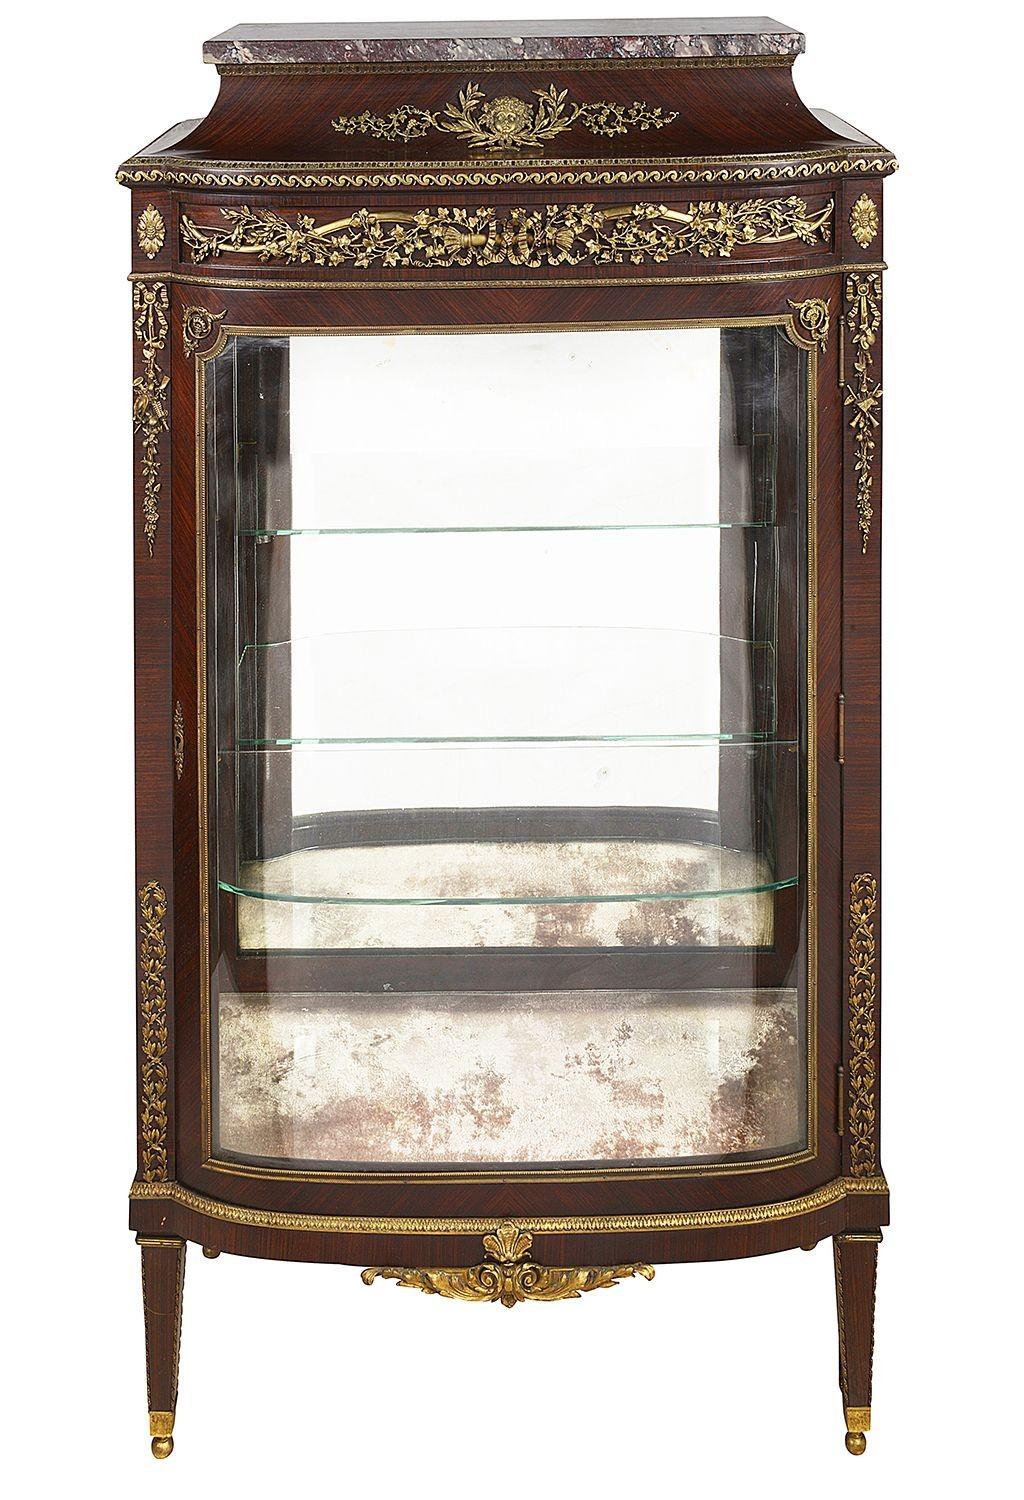 A very good quality French marble topped Louis XVI style bow fronted vitrine, having fine quality classical gilded ormolu mounts, a single glazed door opening to reveal glass shelves within. Riased on square tapering legs. In the manner of Francoise